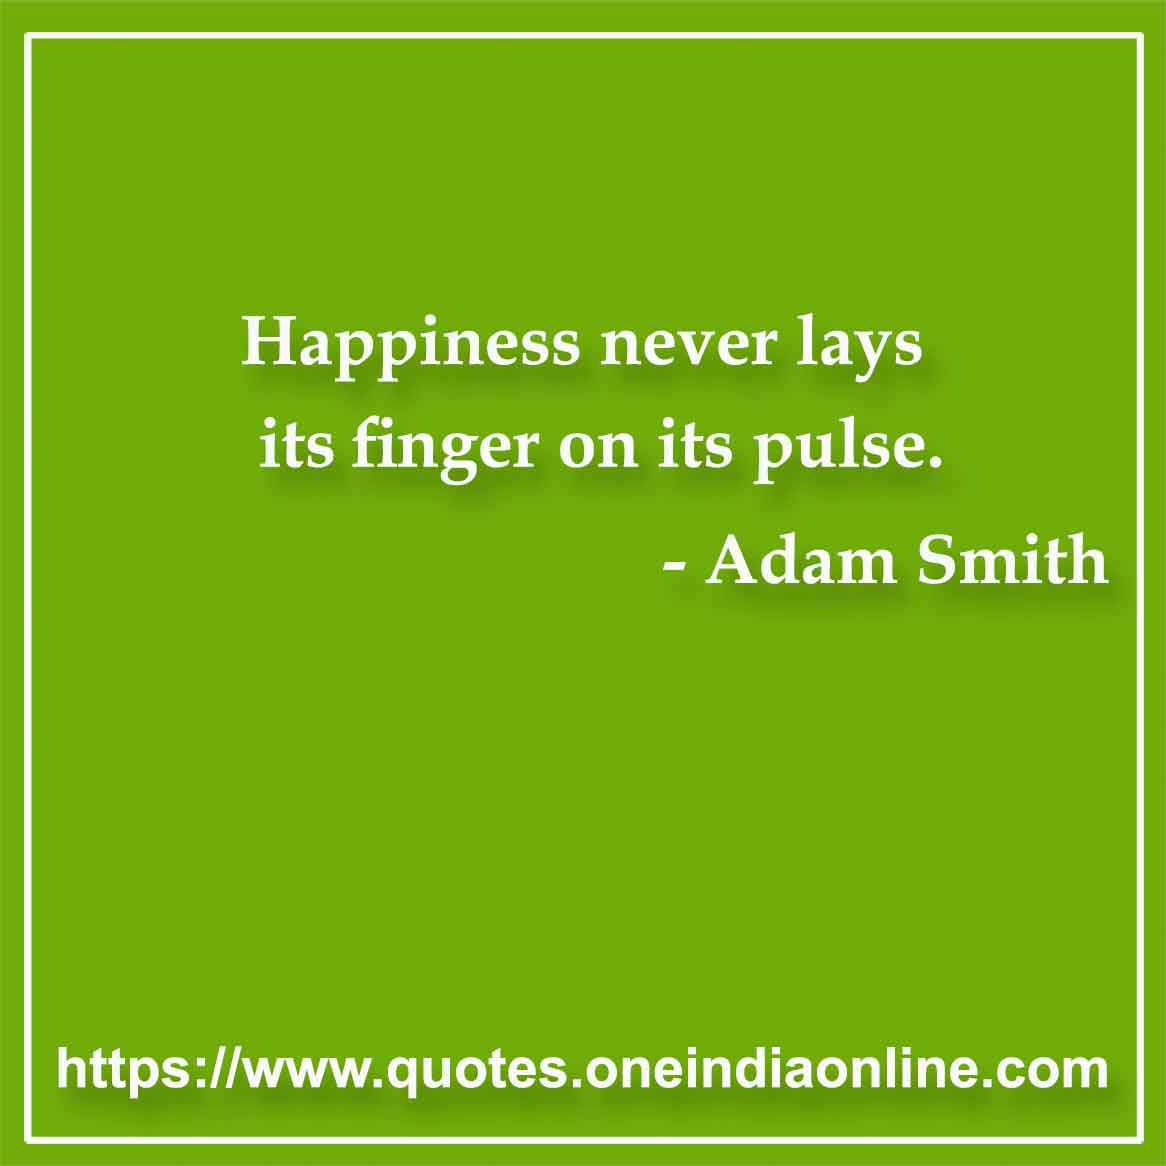 Happiness never lays its finger on its pulse.

- Adam Smith Quotes